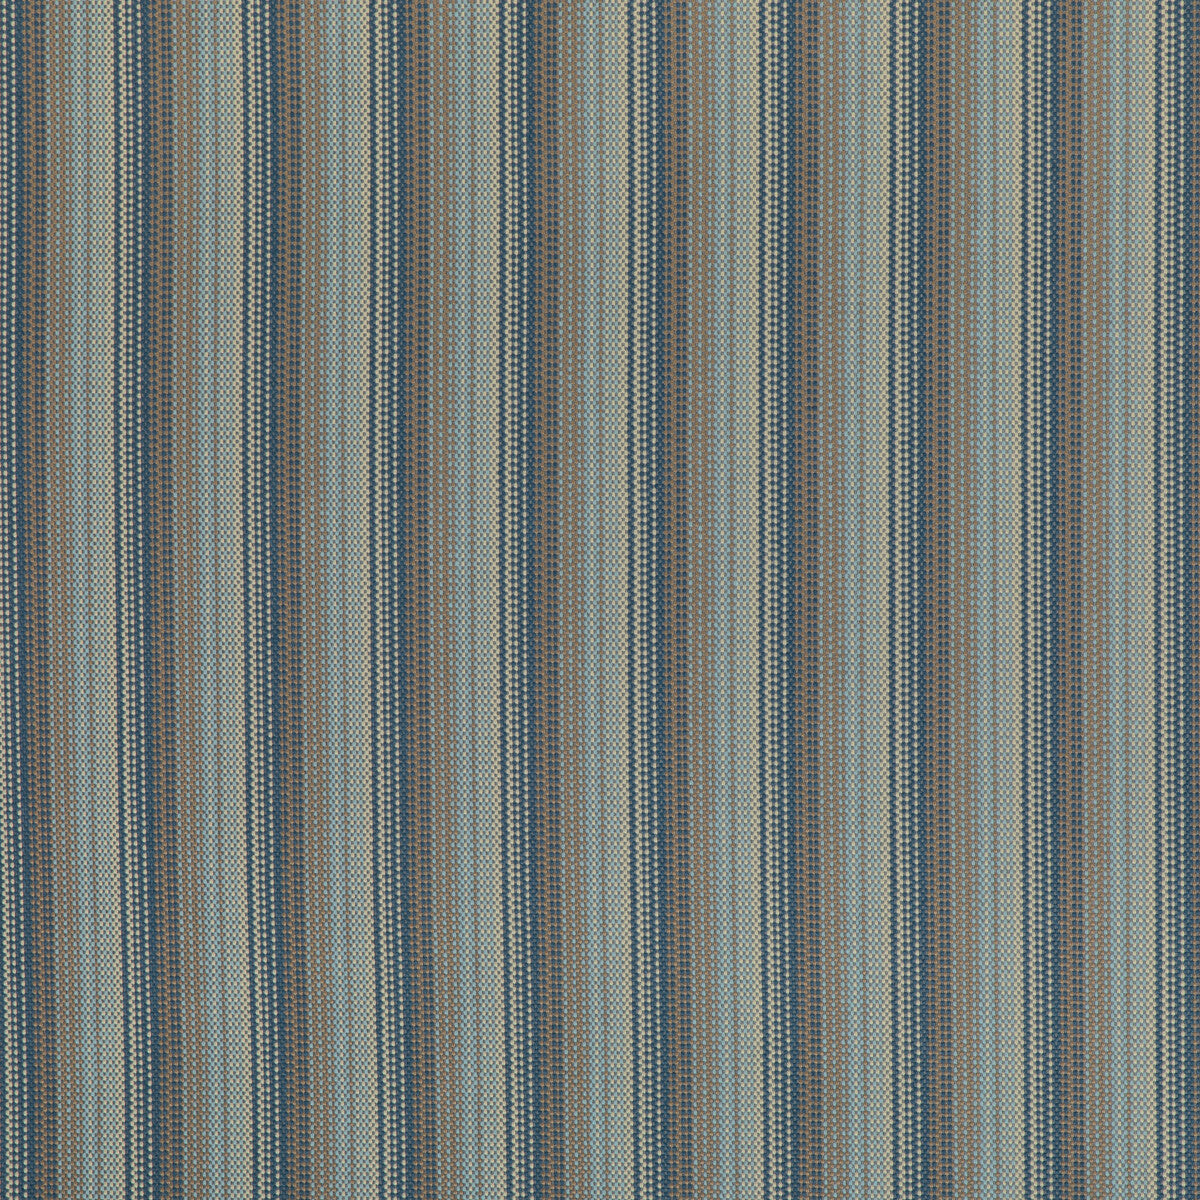 Baystreet fabric in lake color - pattern 37068.514.0 - by Kravet Contract in the Chesapeake collection